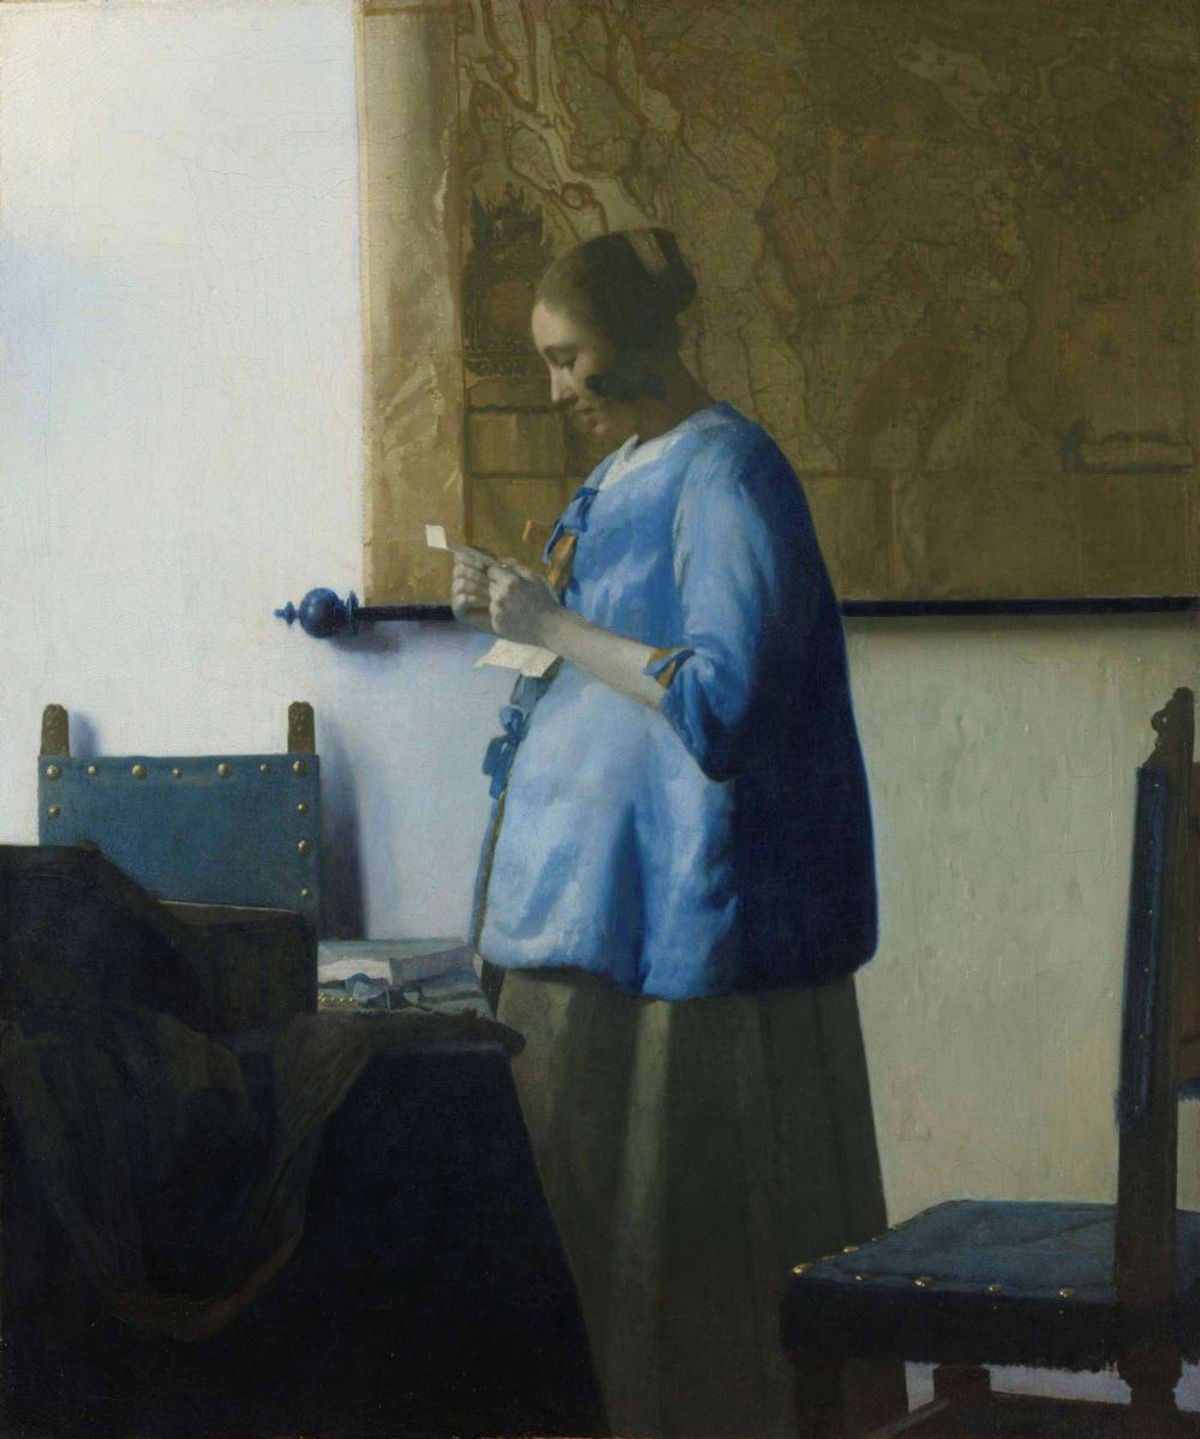 Vermeer's Woman in Blue Reading a Letter (around 1663) will be on loan from the Rijksmuseum for the exhibition at Dresden's Semperbau © Rijksmuseum